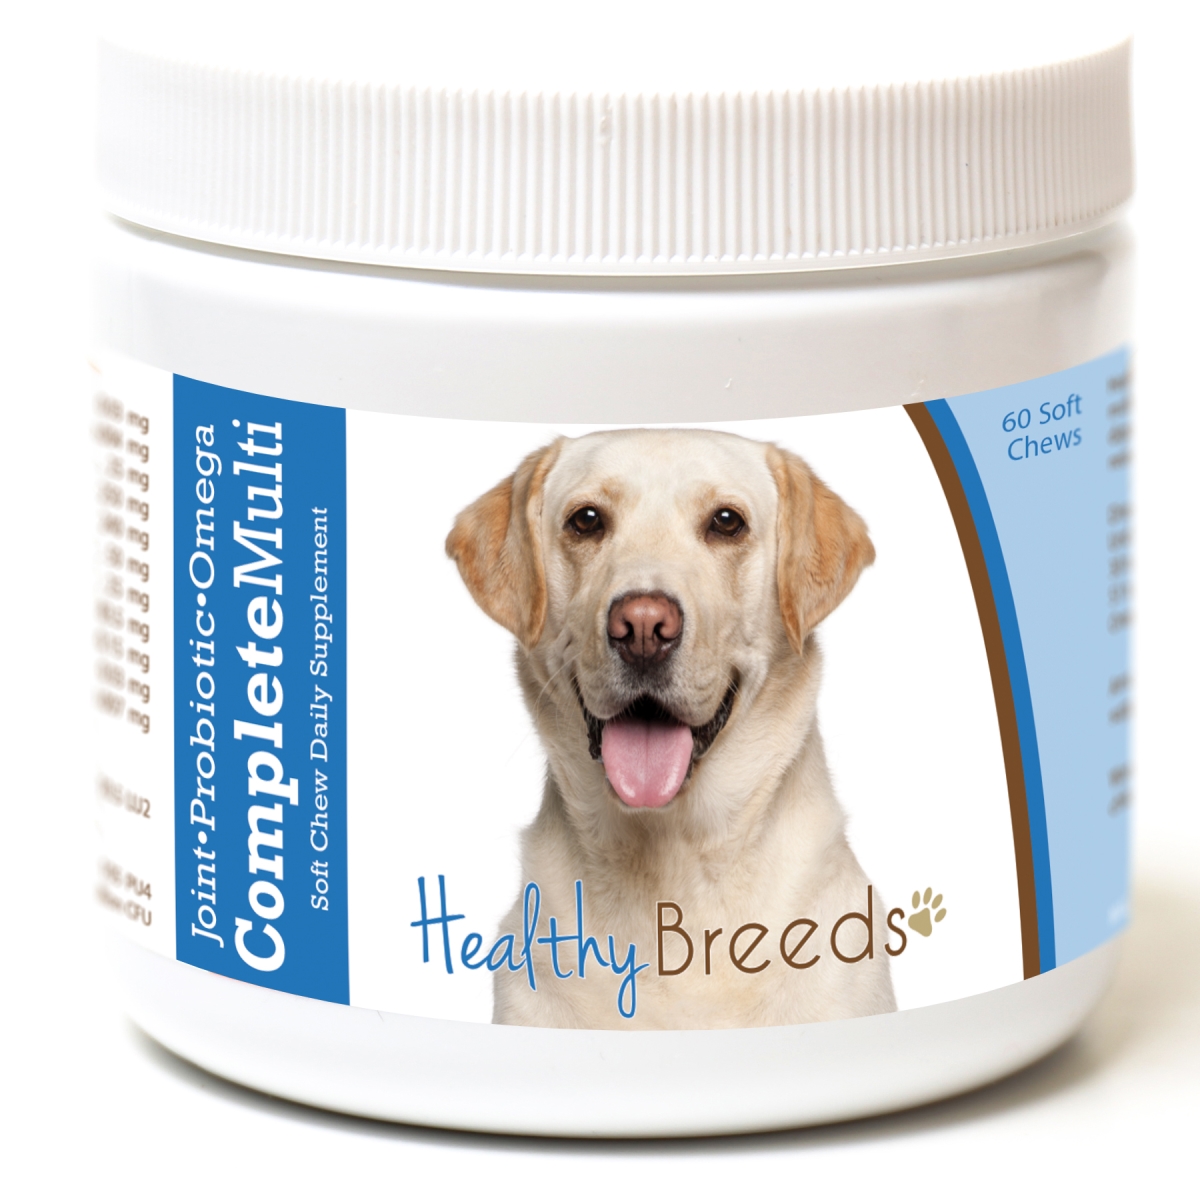 Picture of Healthy Breeds 192959008340 Labrador Retriever All in One Multivitamin Soft Chew - 60 Count